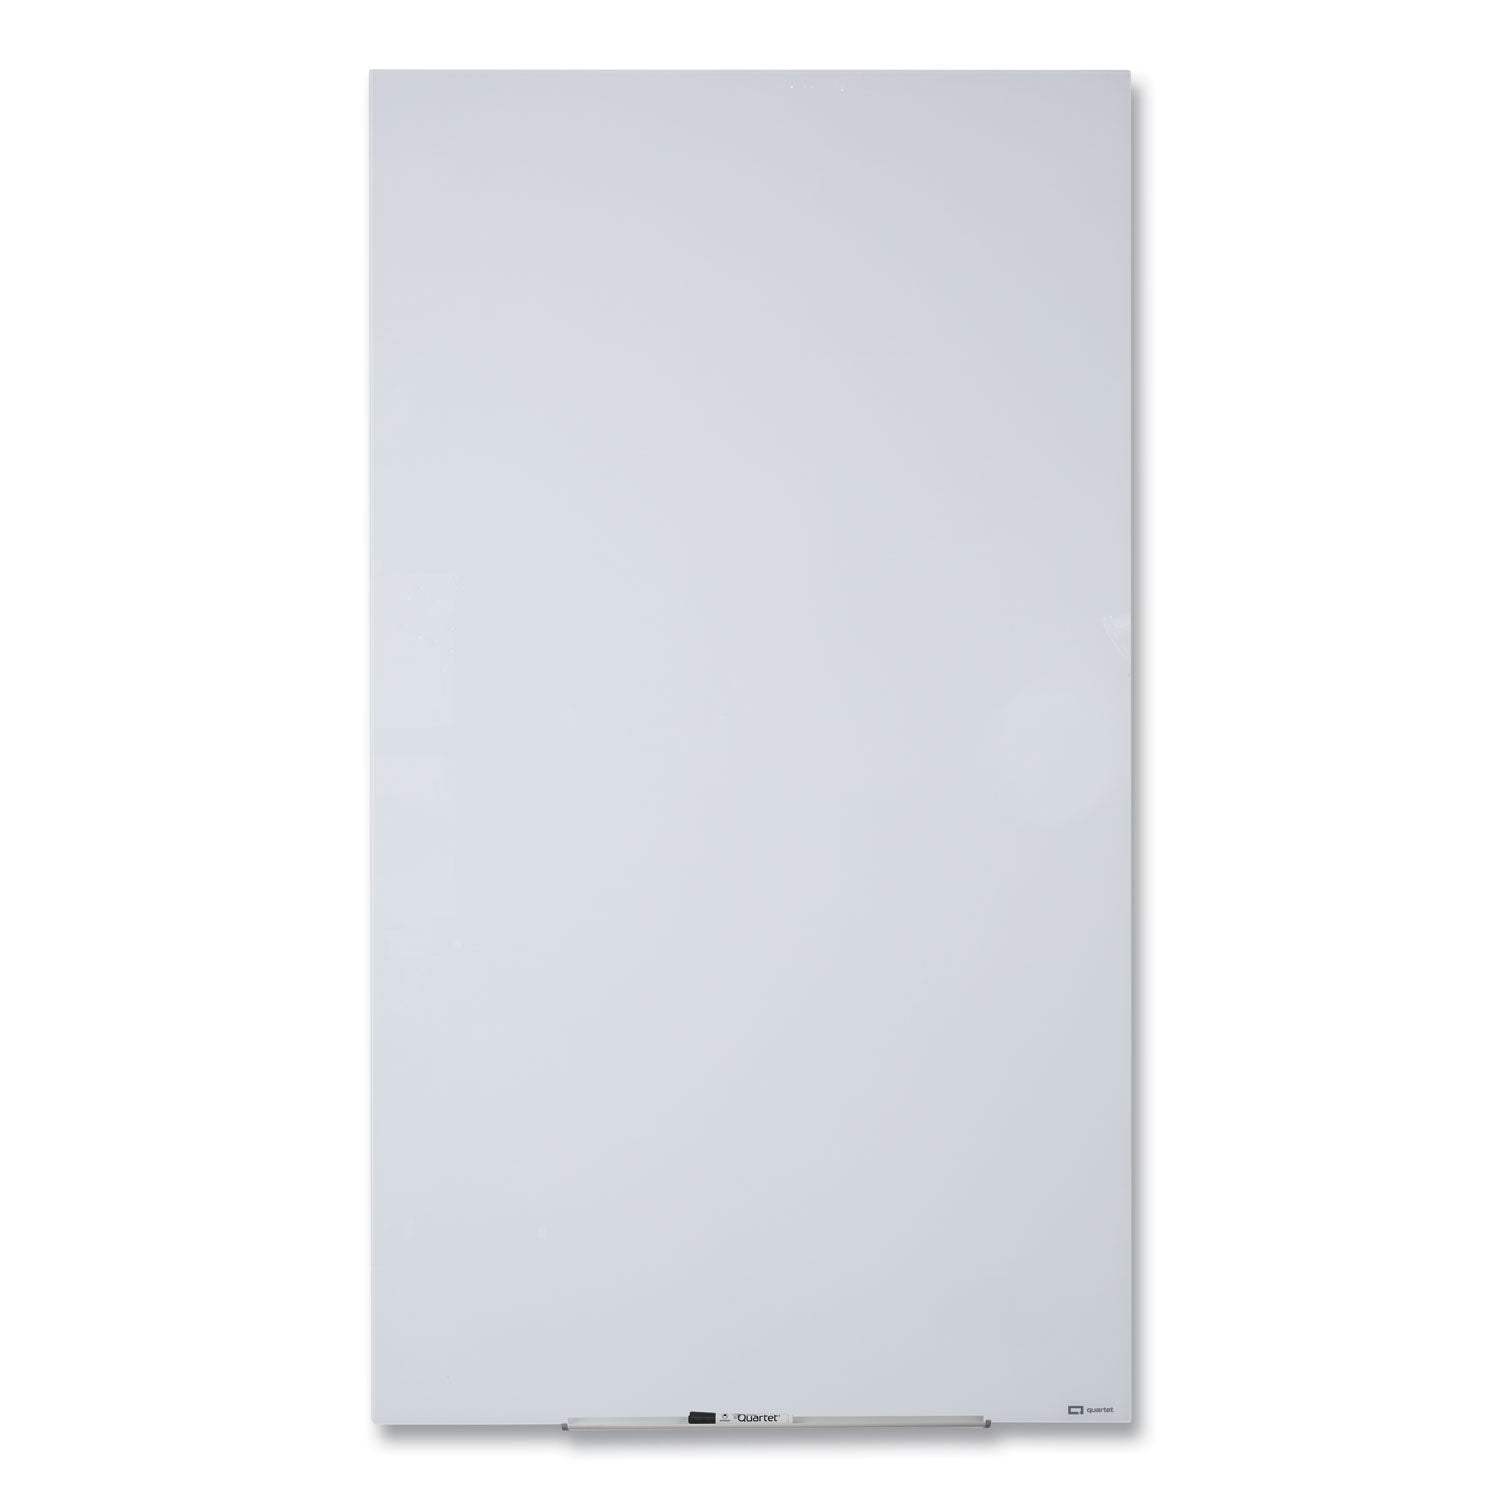 invisamount-vertical-magnetic-glass-dry-erase-boards-28-x-50-white-surface_qrtq012850imw - 1